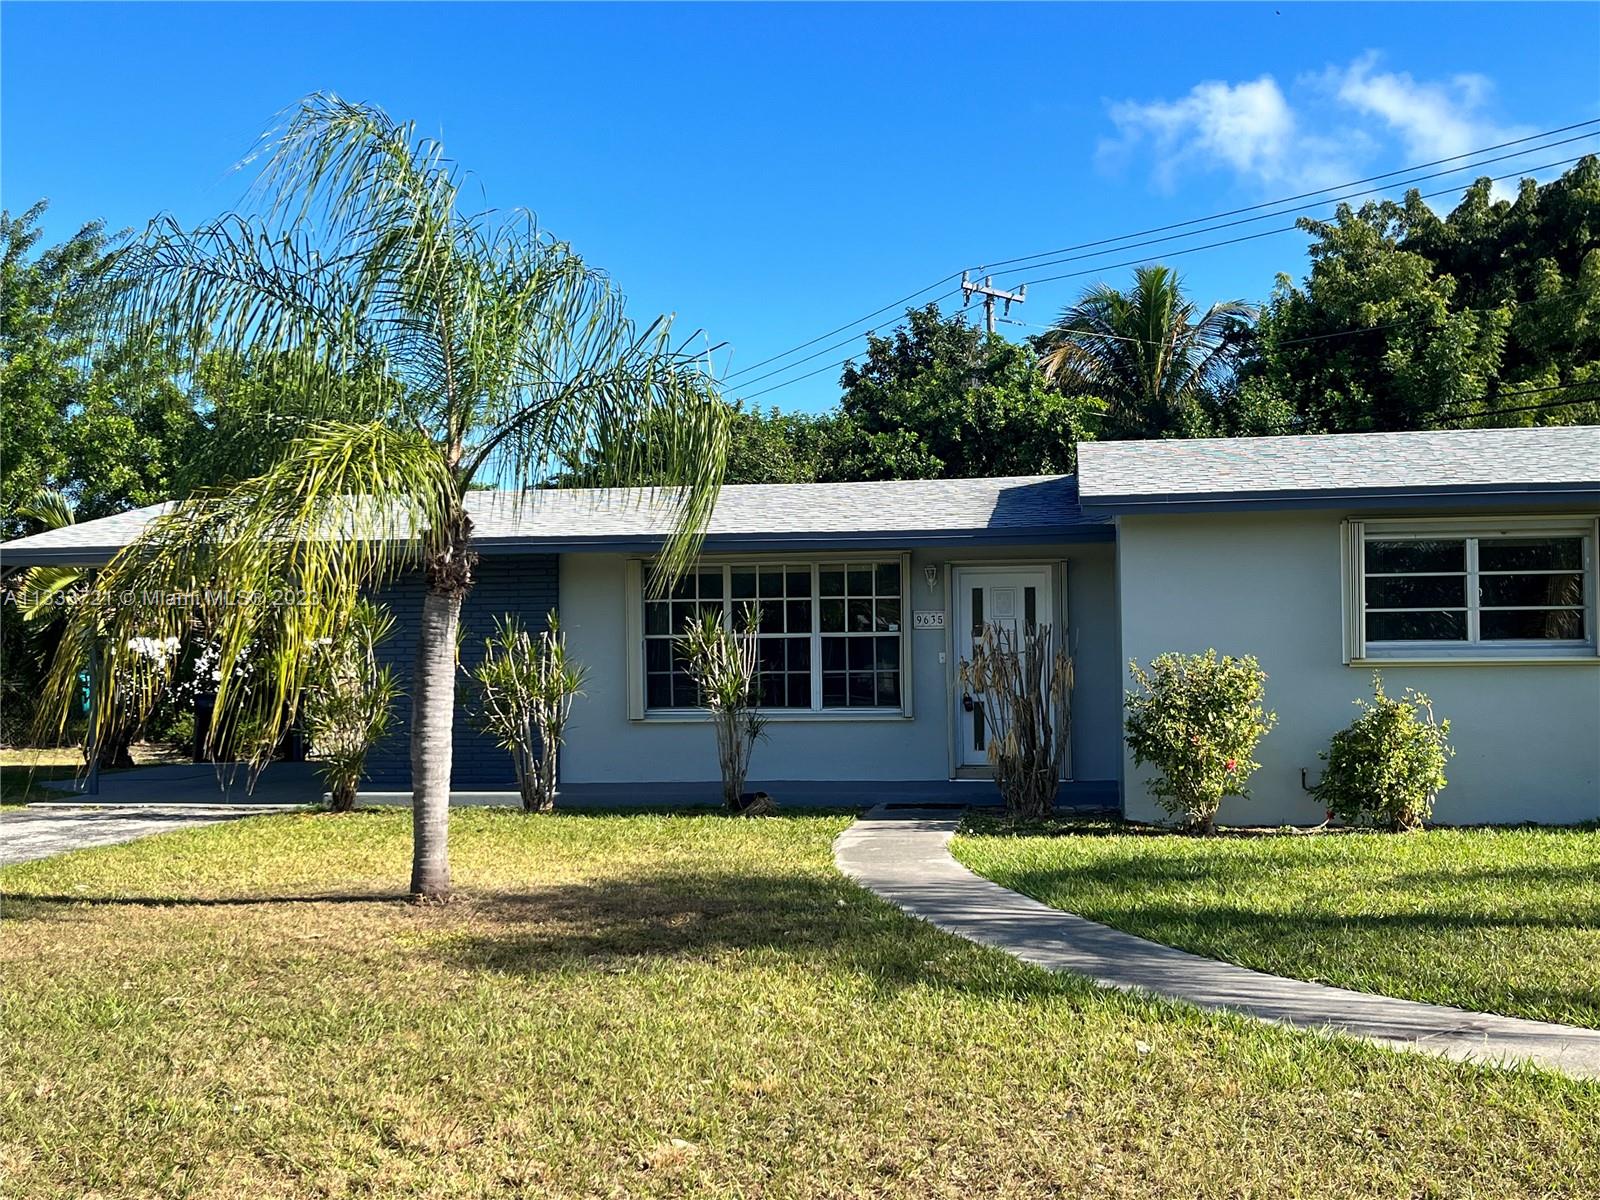 Beautiful Palmetto Bay Single Family Home 3 bedrooms, 2 bathrooms, beautiful upgraded kitchen, stainless steel  appliances, upgraded bathrooms, Tile floors, Fenced Yard with attached Carport. Palmetto Bay District schools. No association. Fast approval.